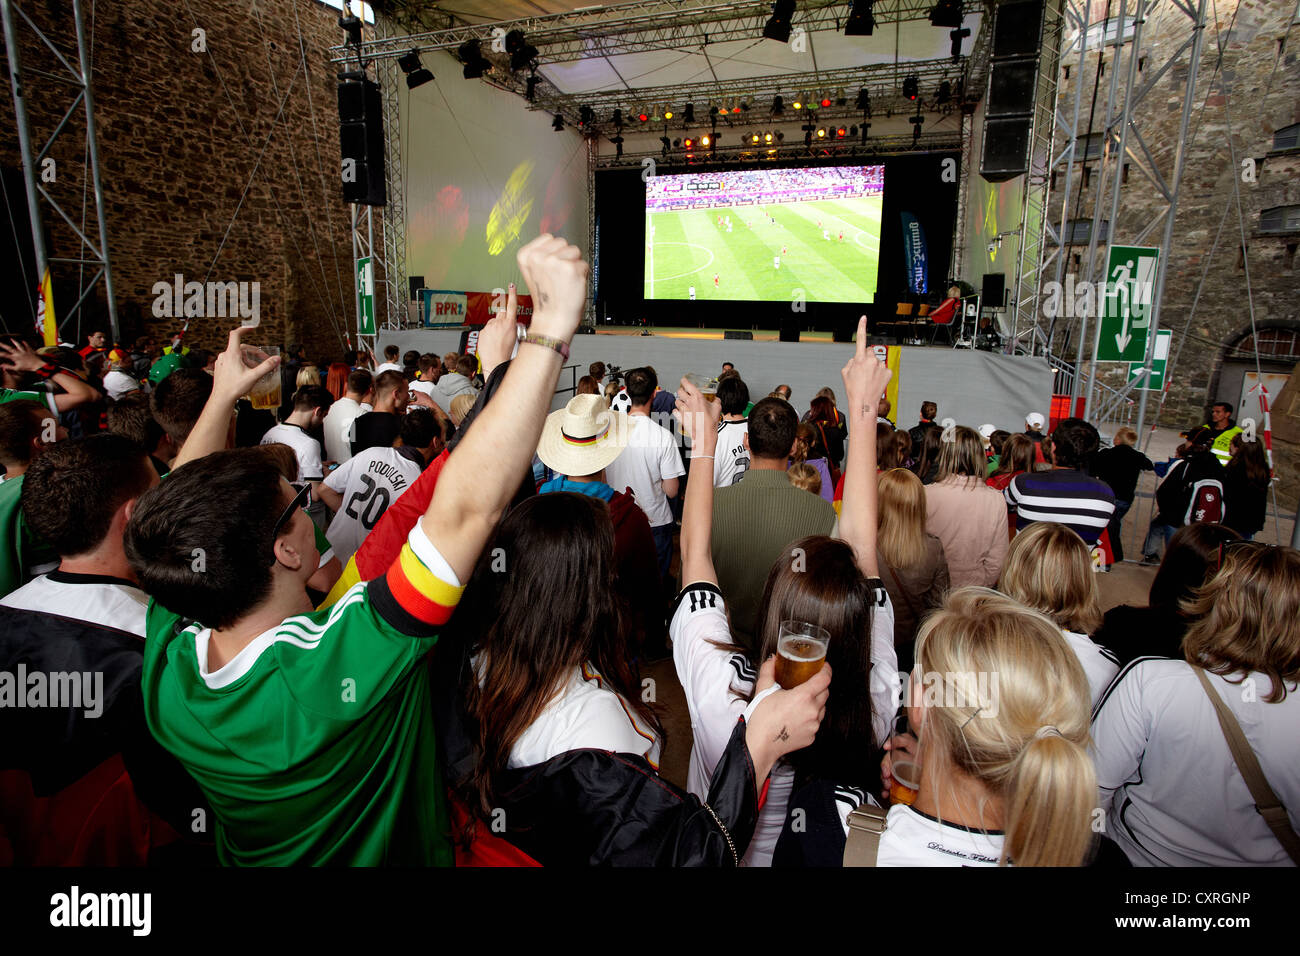 Football fans during a public viewing event at the Euro 2012 championships on Festung Ehrenbreitstein fortress, Koblenz Stock Photo